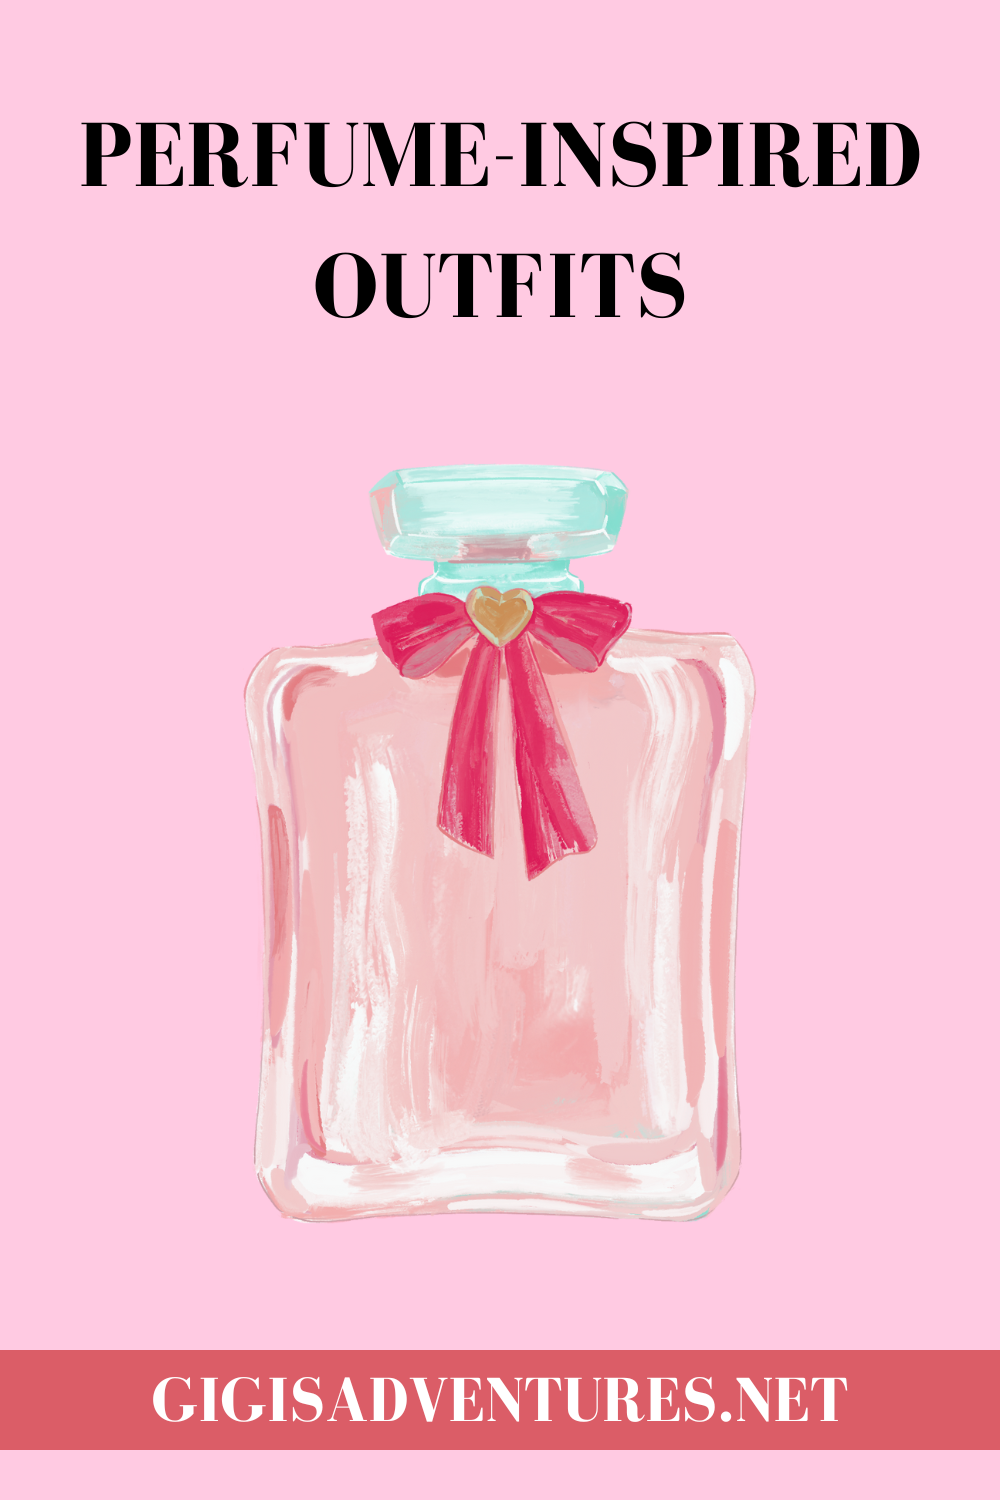 Perfume-Inspired Outfits, part 2